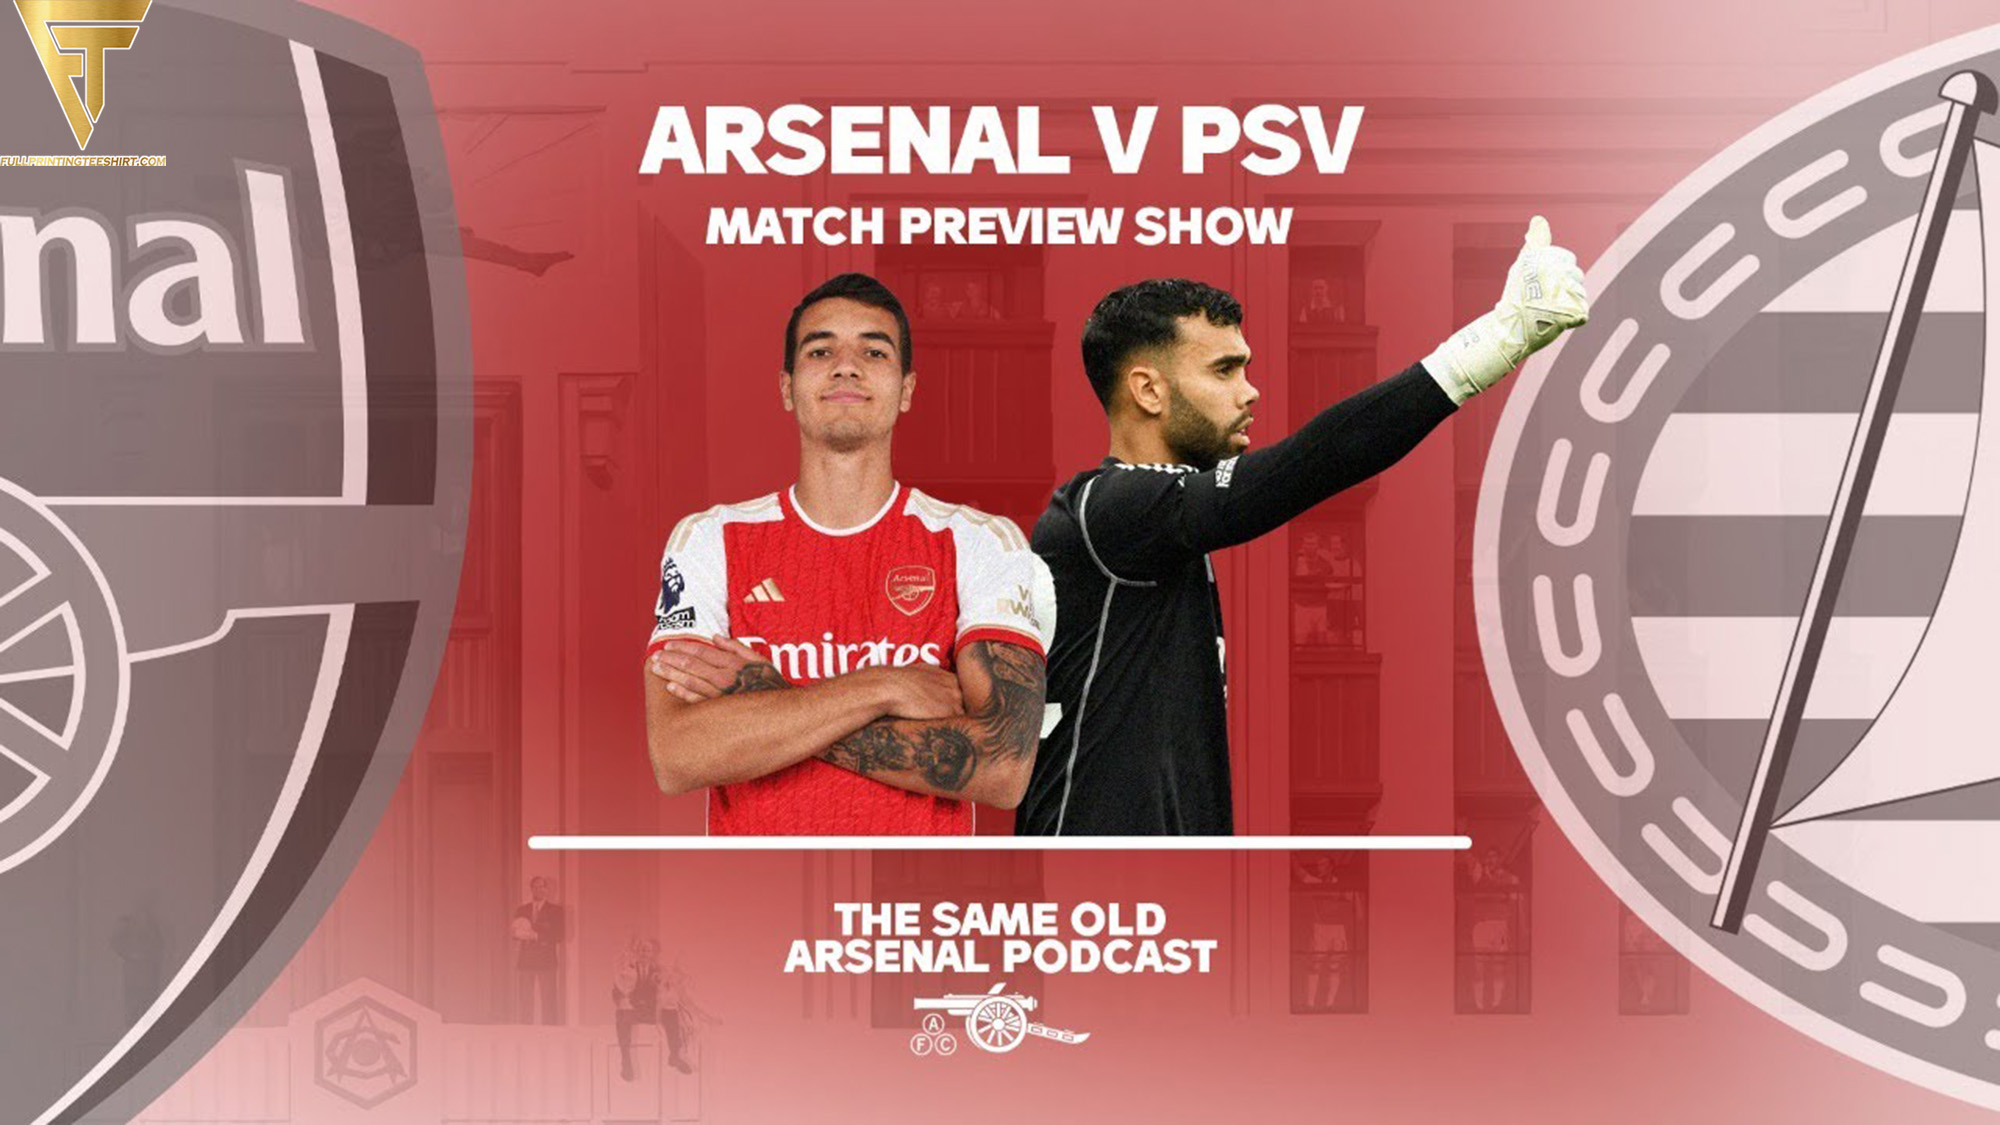 Showdown of Titans PSV Eindhoven vs Arsenal in UEFA Champions League 2023 - Predictions and Expectations